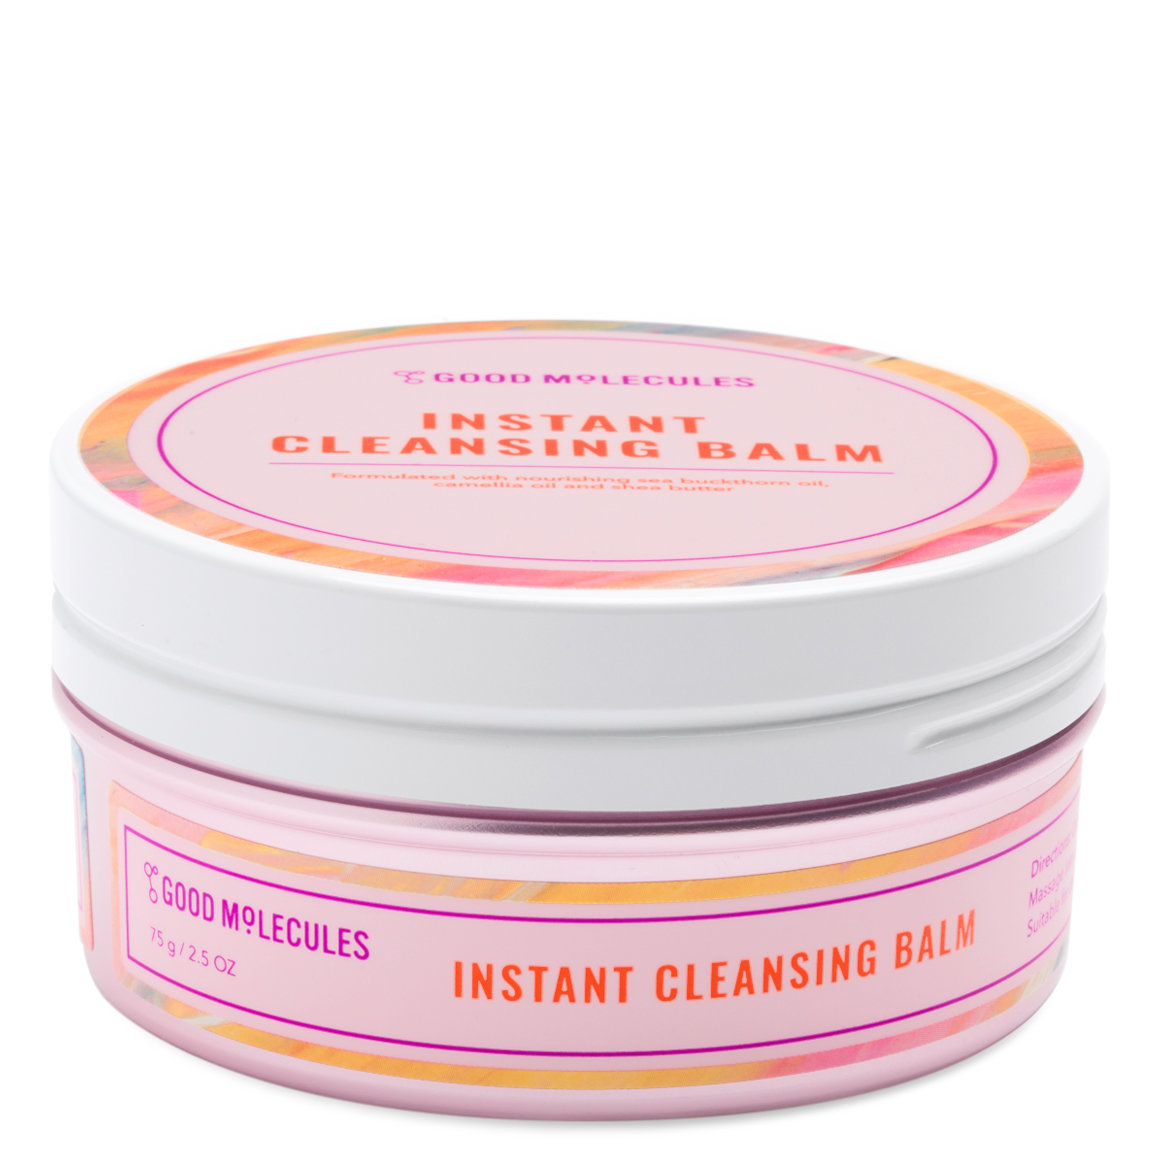 Good Molecules Instant Cleansing Balm 75 g alternative view 1 - product swatch.